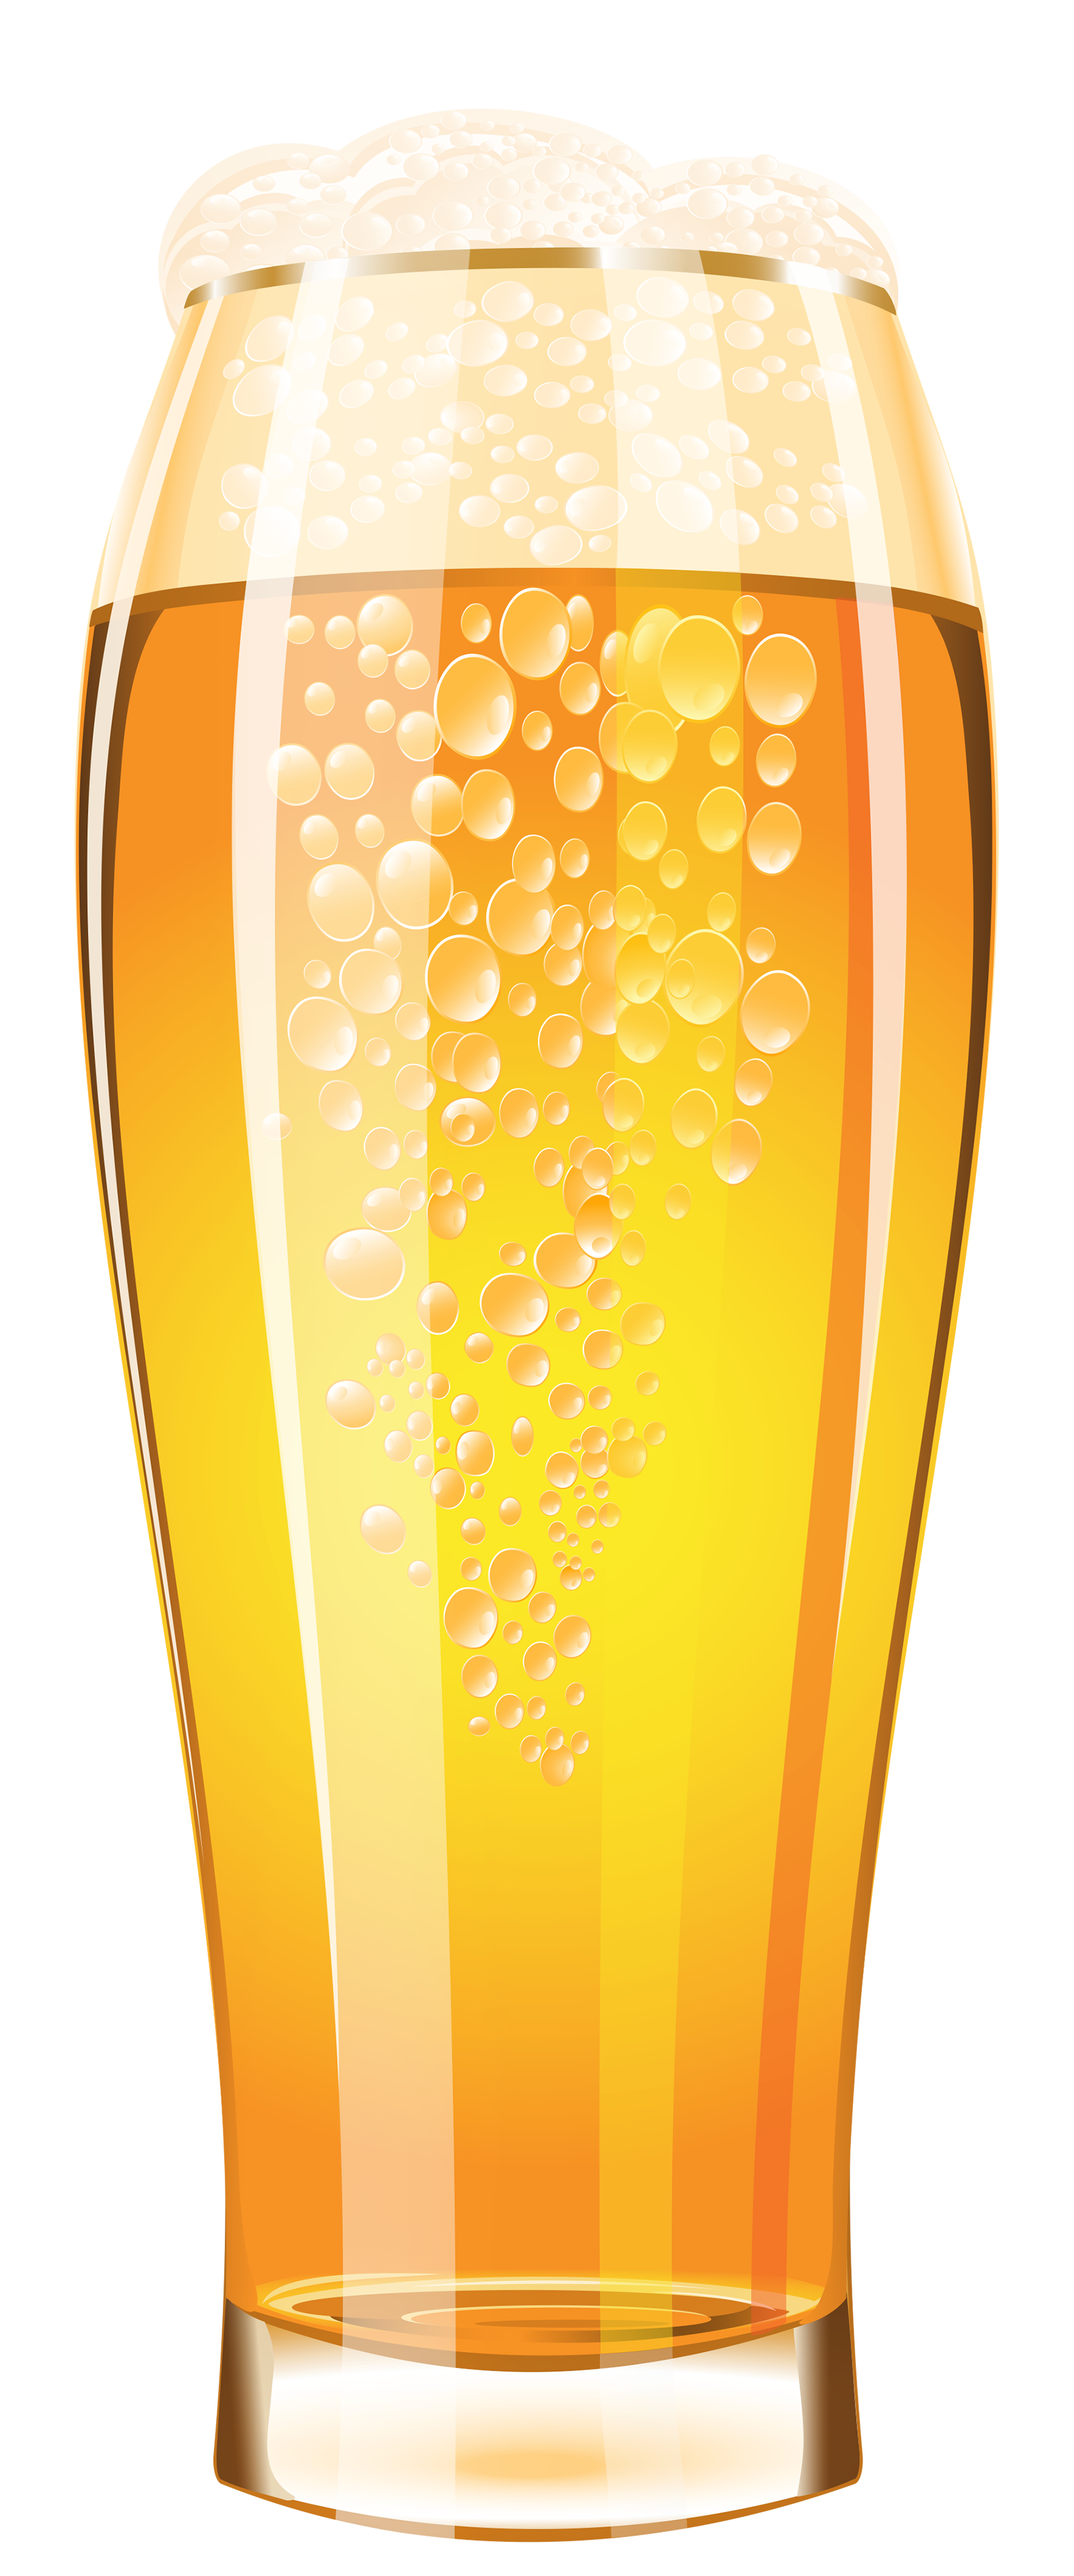 https://gallery.yopriceville.com/var/albums/Free-Clipart-Pictures/Drinks-PNG-/Glass_of_Beer_PNG_Vector_Clipart_Image.png?m=1434423301